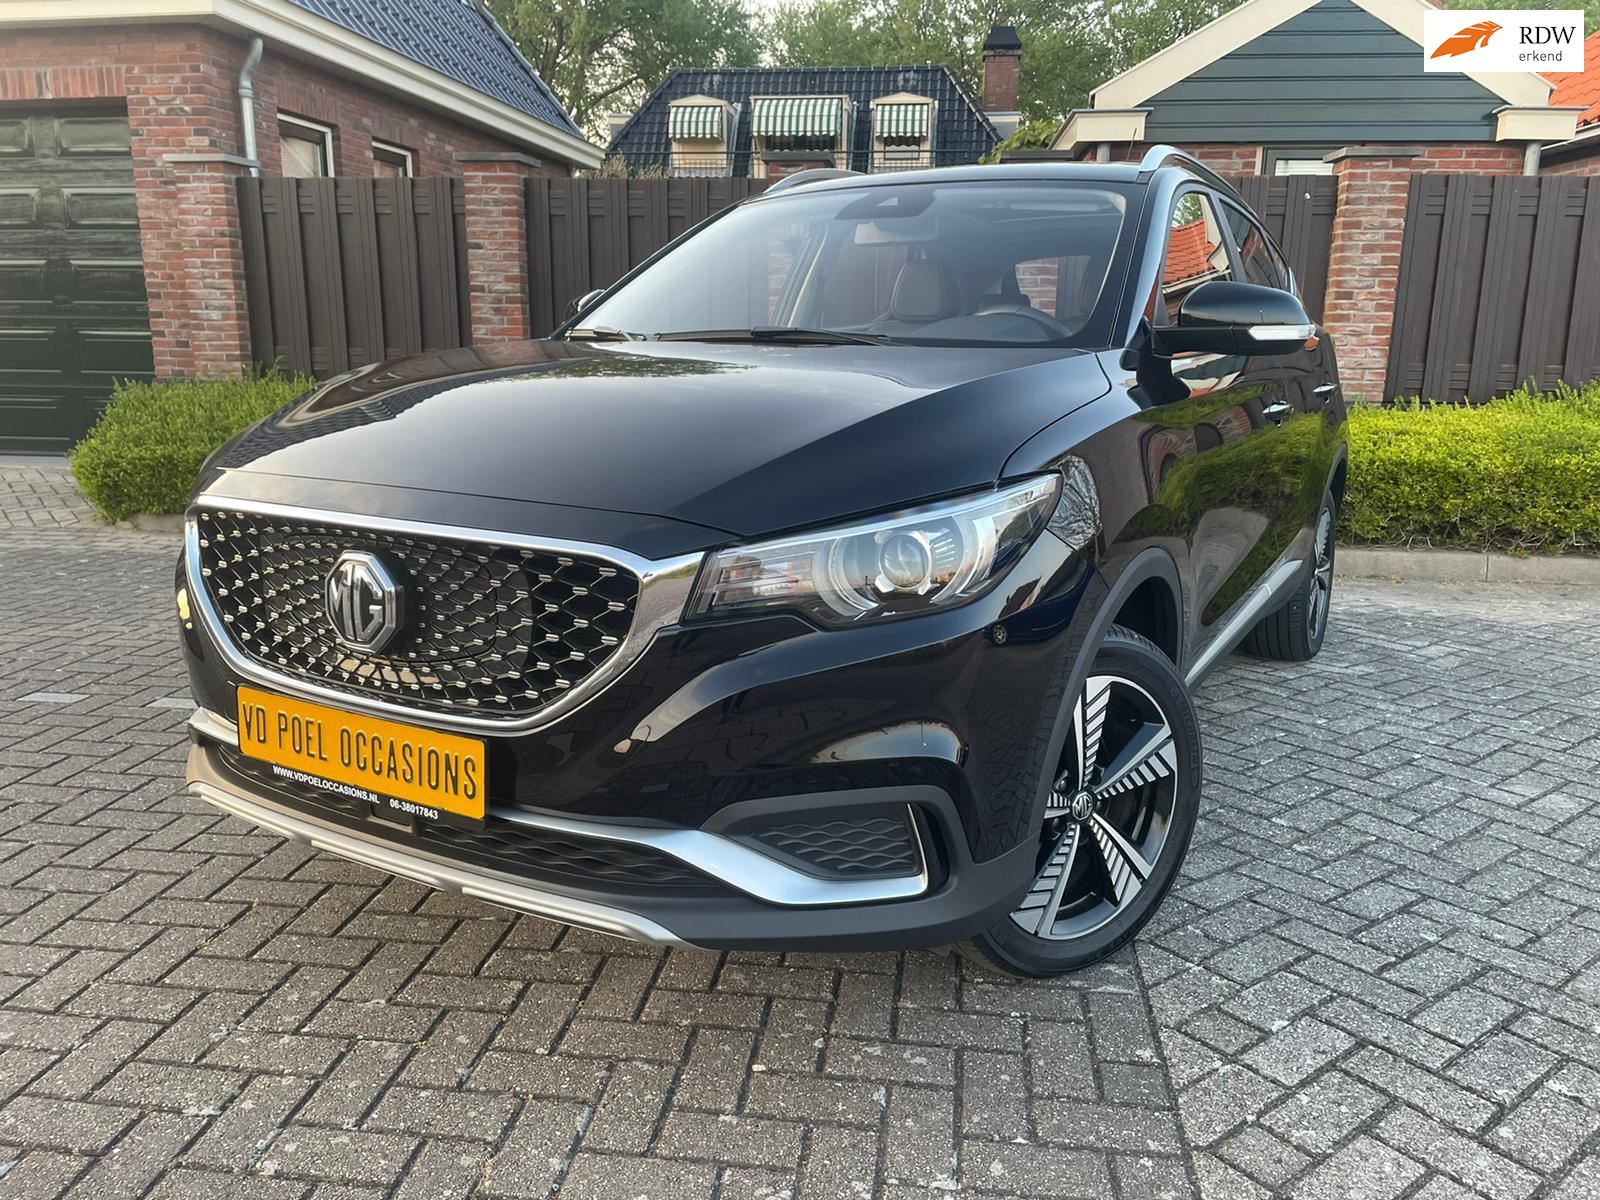 MG ZS occasion - Van der Poel Occasions